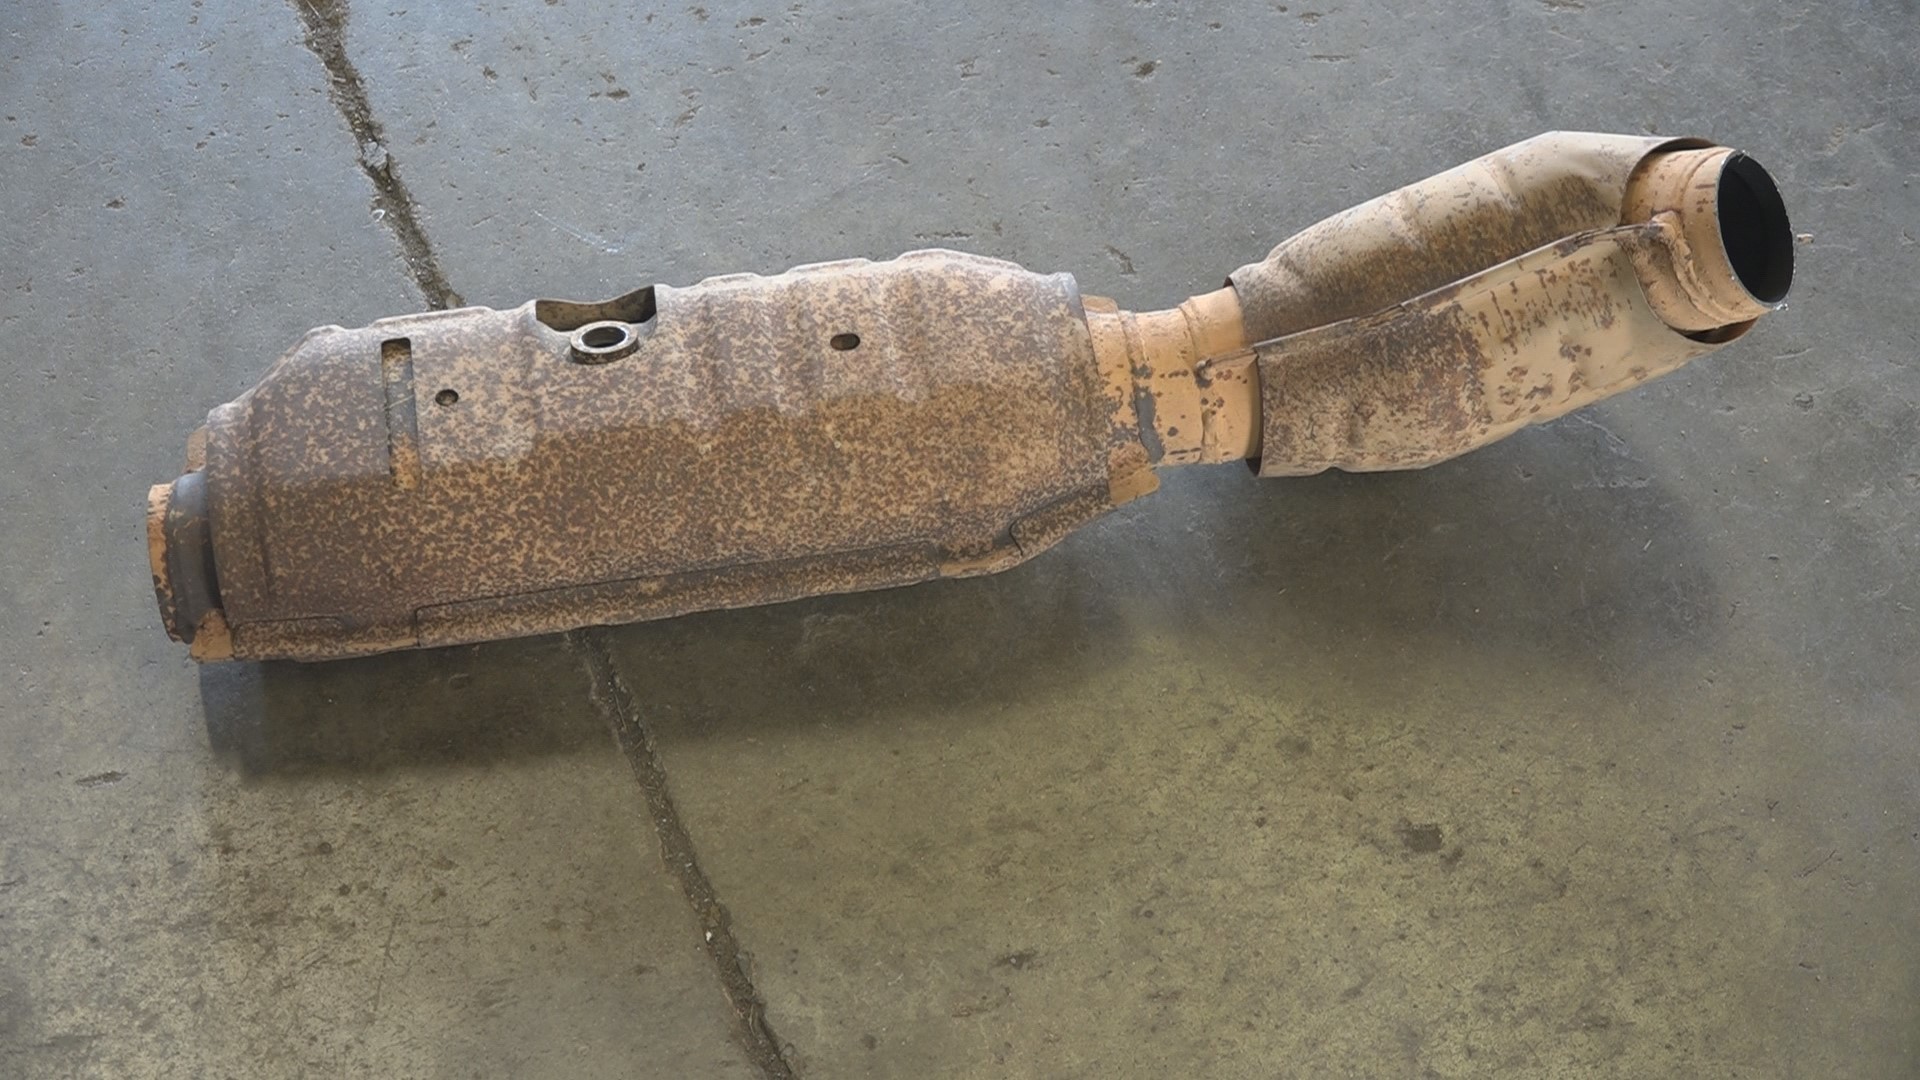 The bill would define catalytic converter theft as a felony, carrying up to ten years in prison.